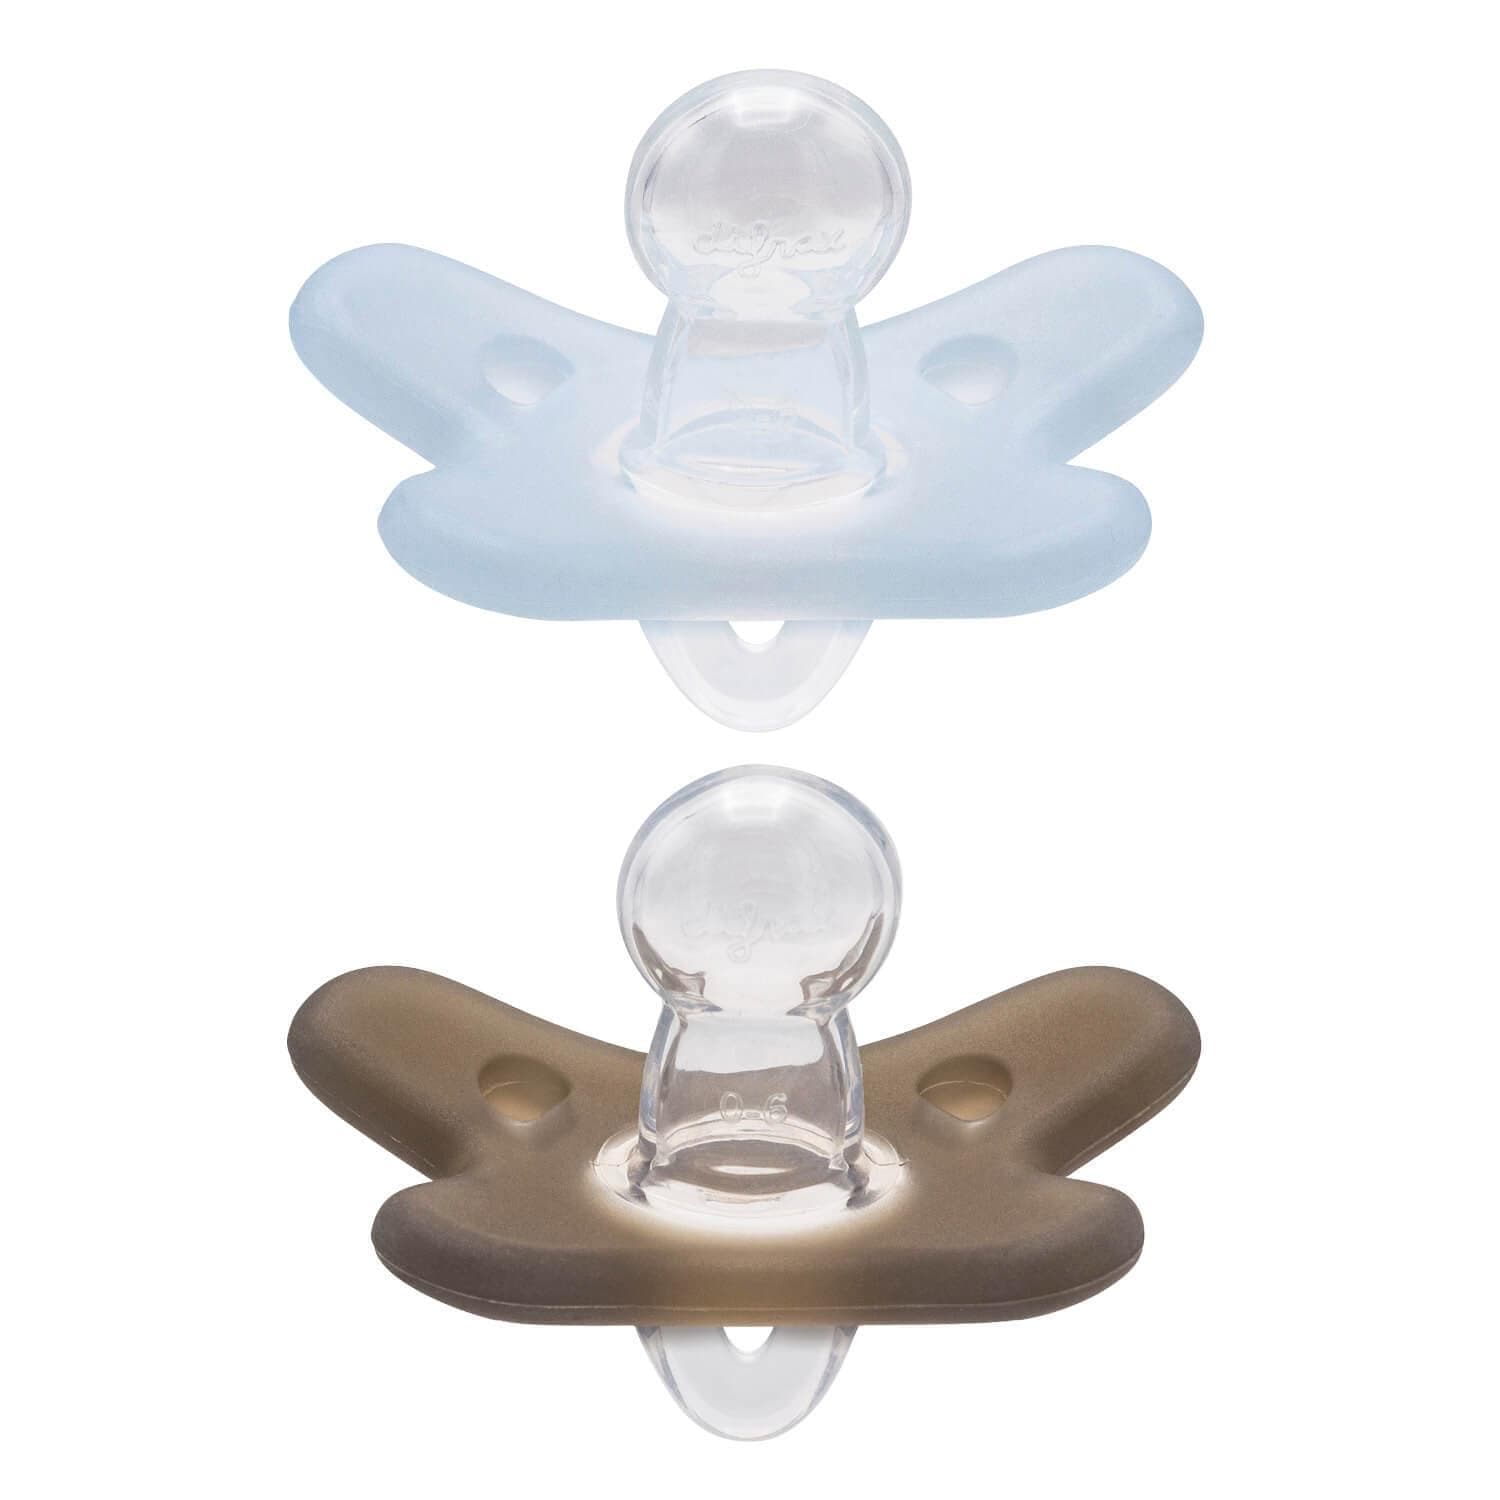 Silicone pacifier 0-6 months - 2 pack